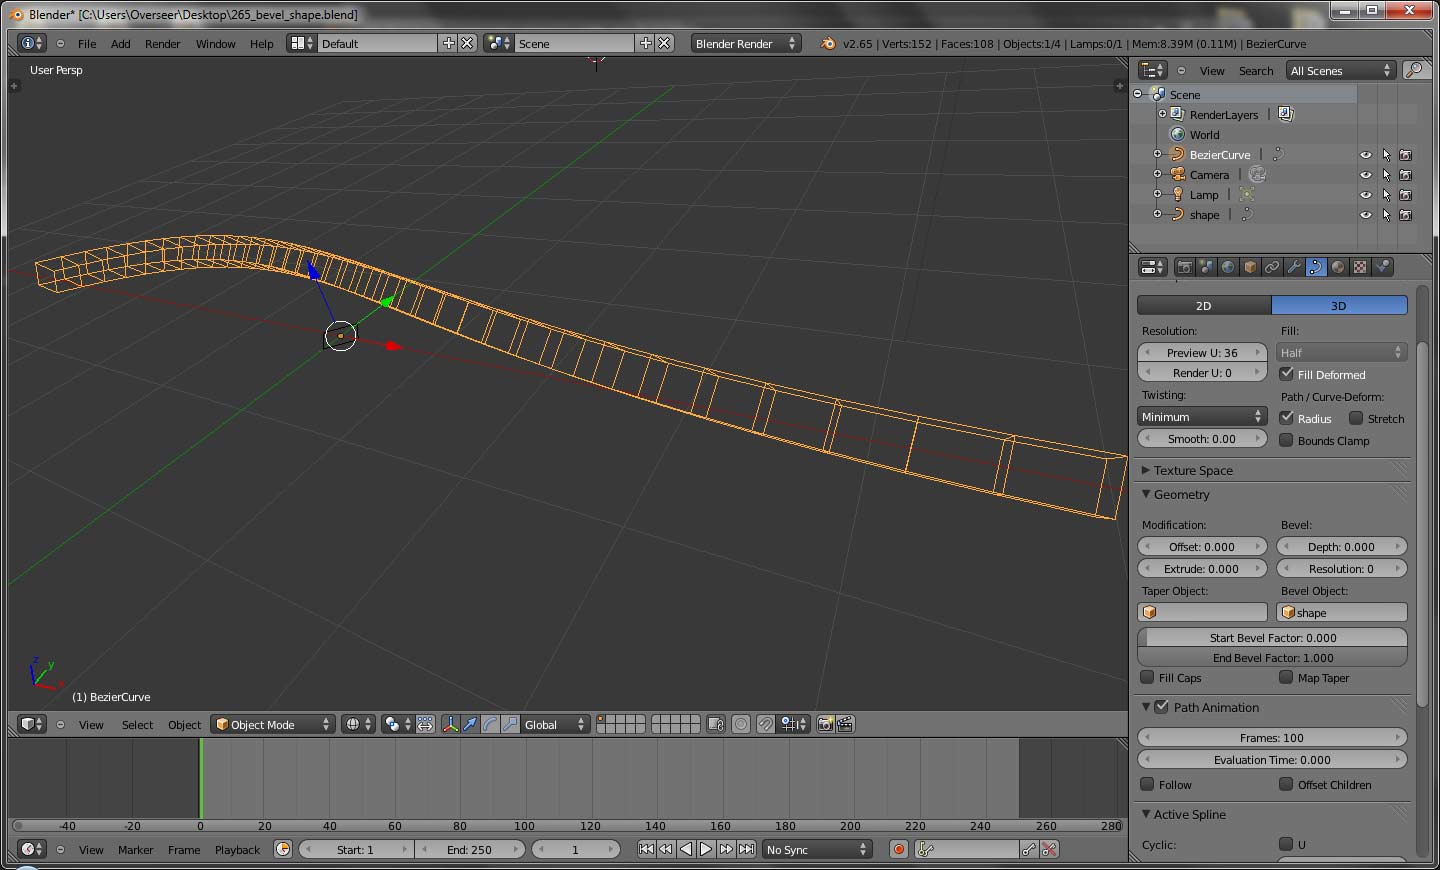 How to along curve without bending - Modeling - Blender Community